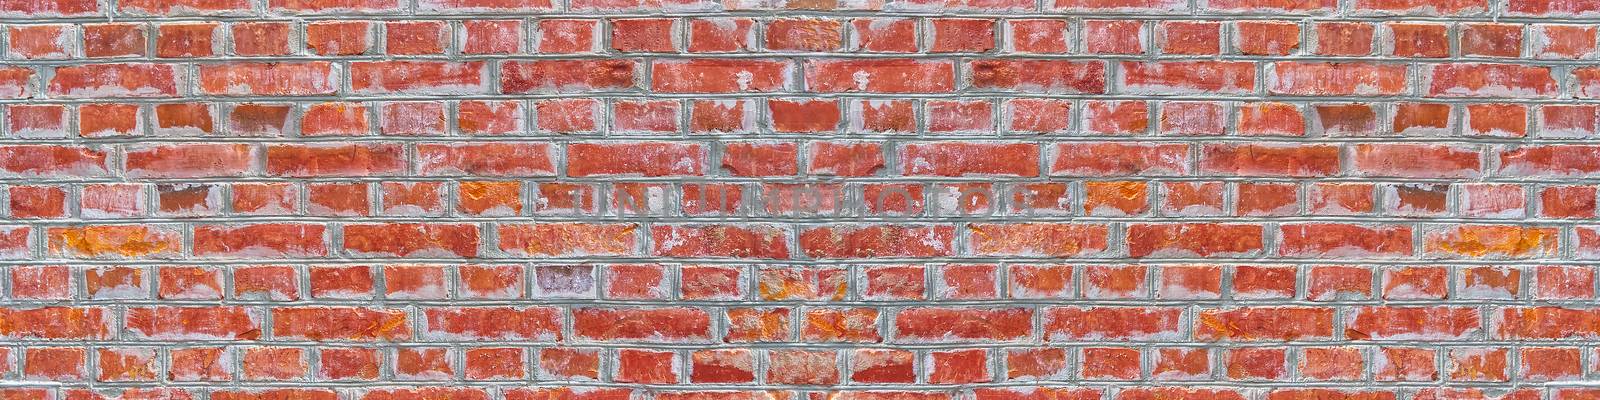 Panoramic rugged old red brown bricks wall texture. vintage retro industrial banner background